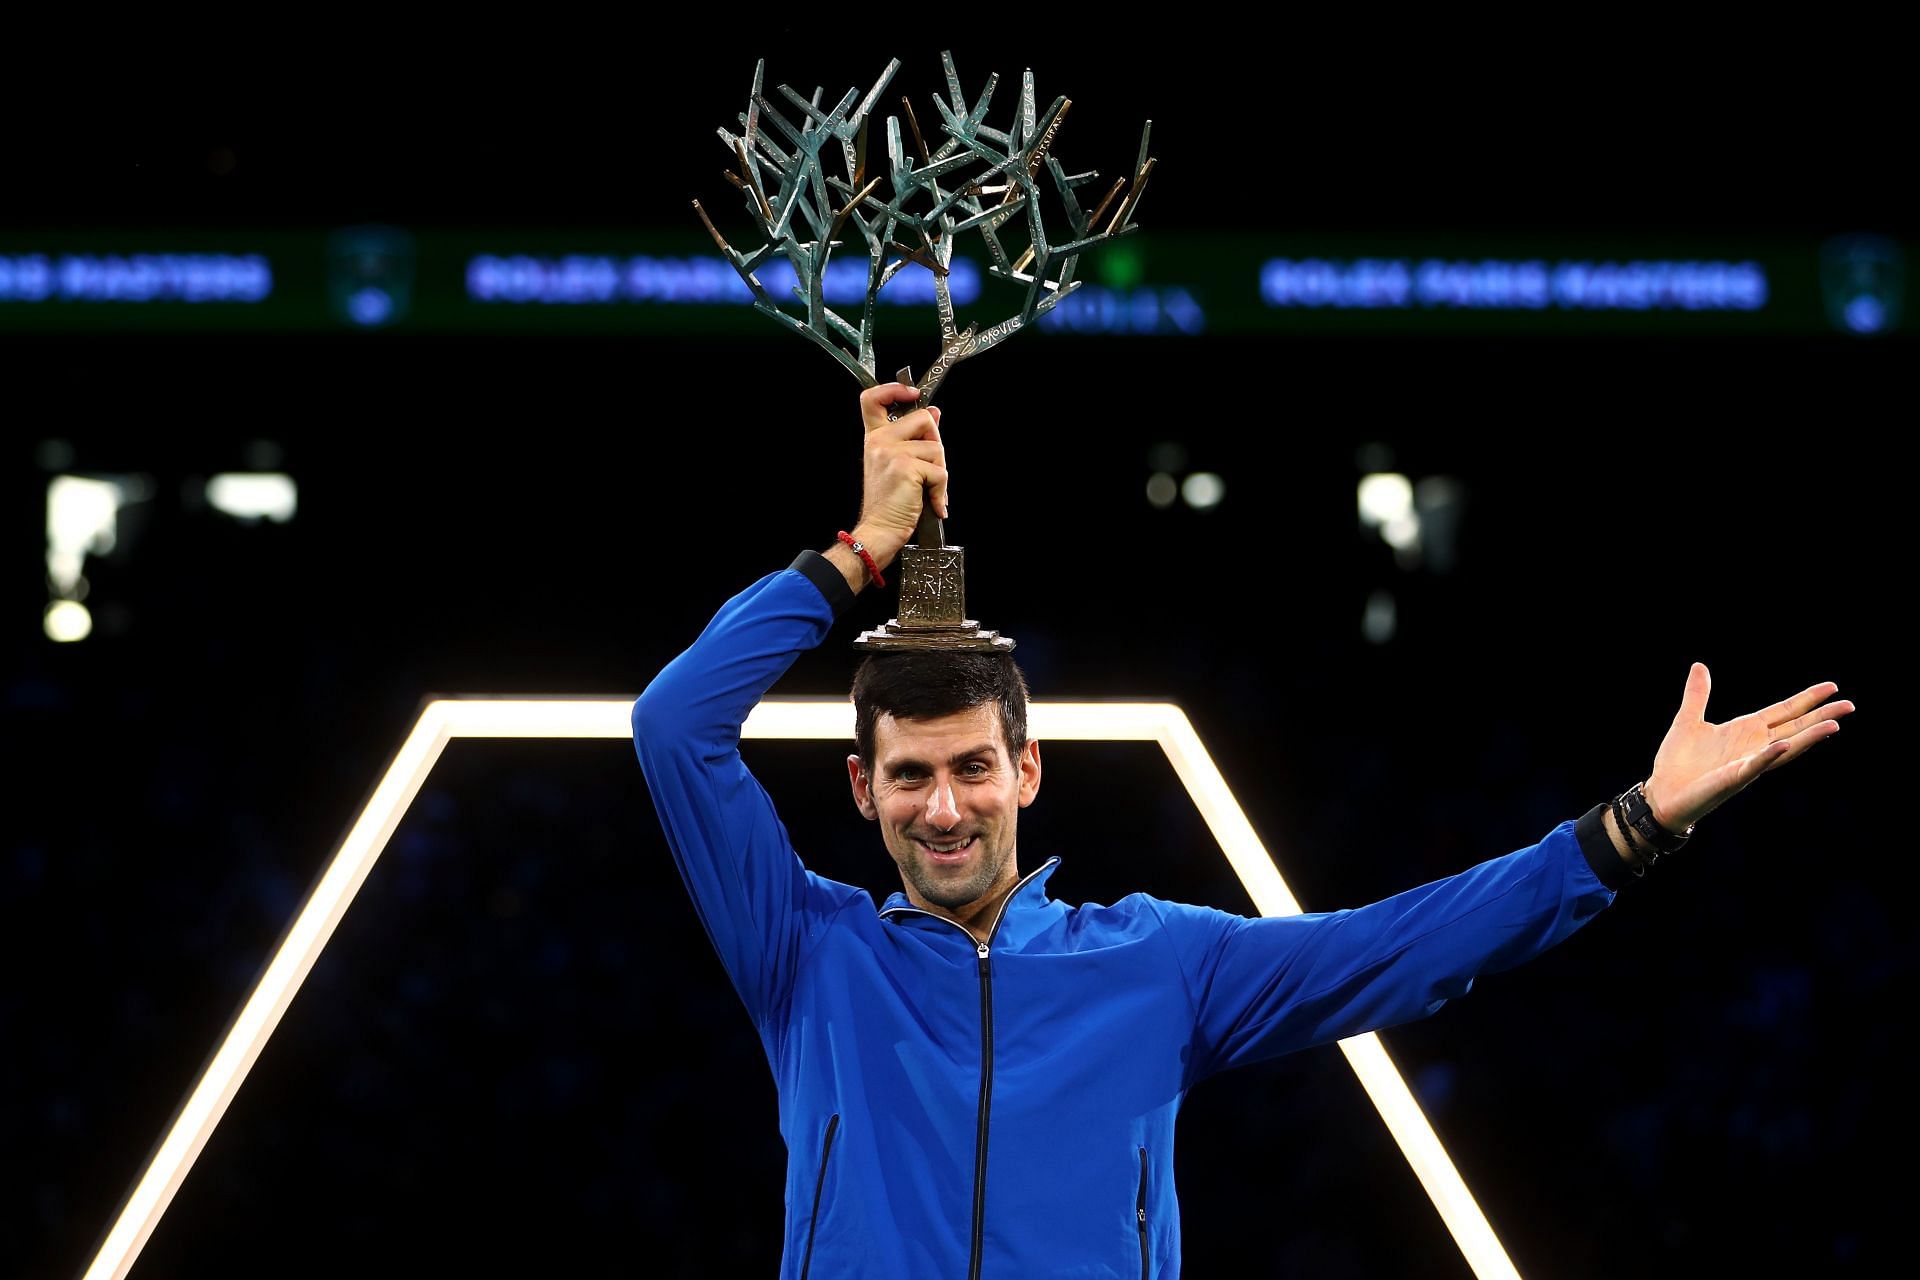 Novak Djokovic is a five-time champion at the Rolex Paris Masters